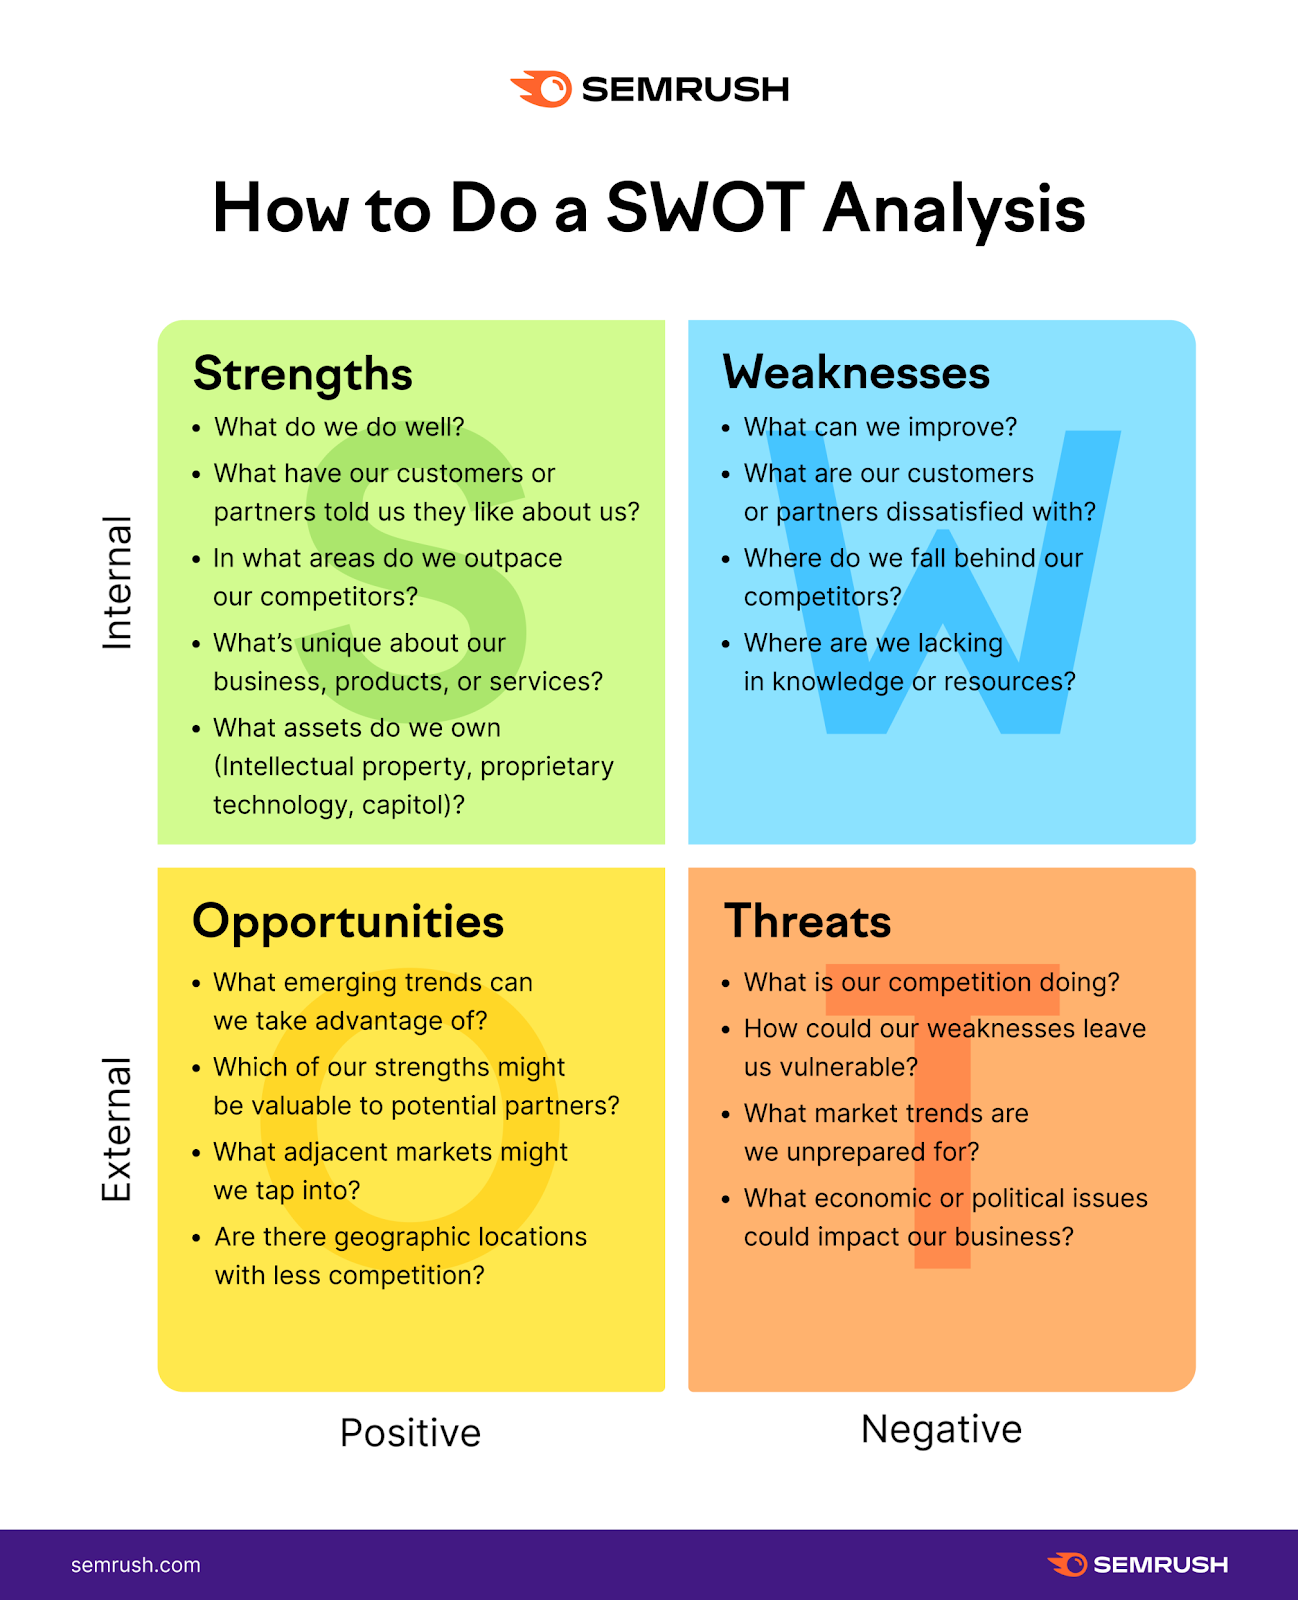 How to do a SWOT analysis.